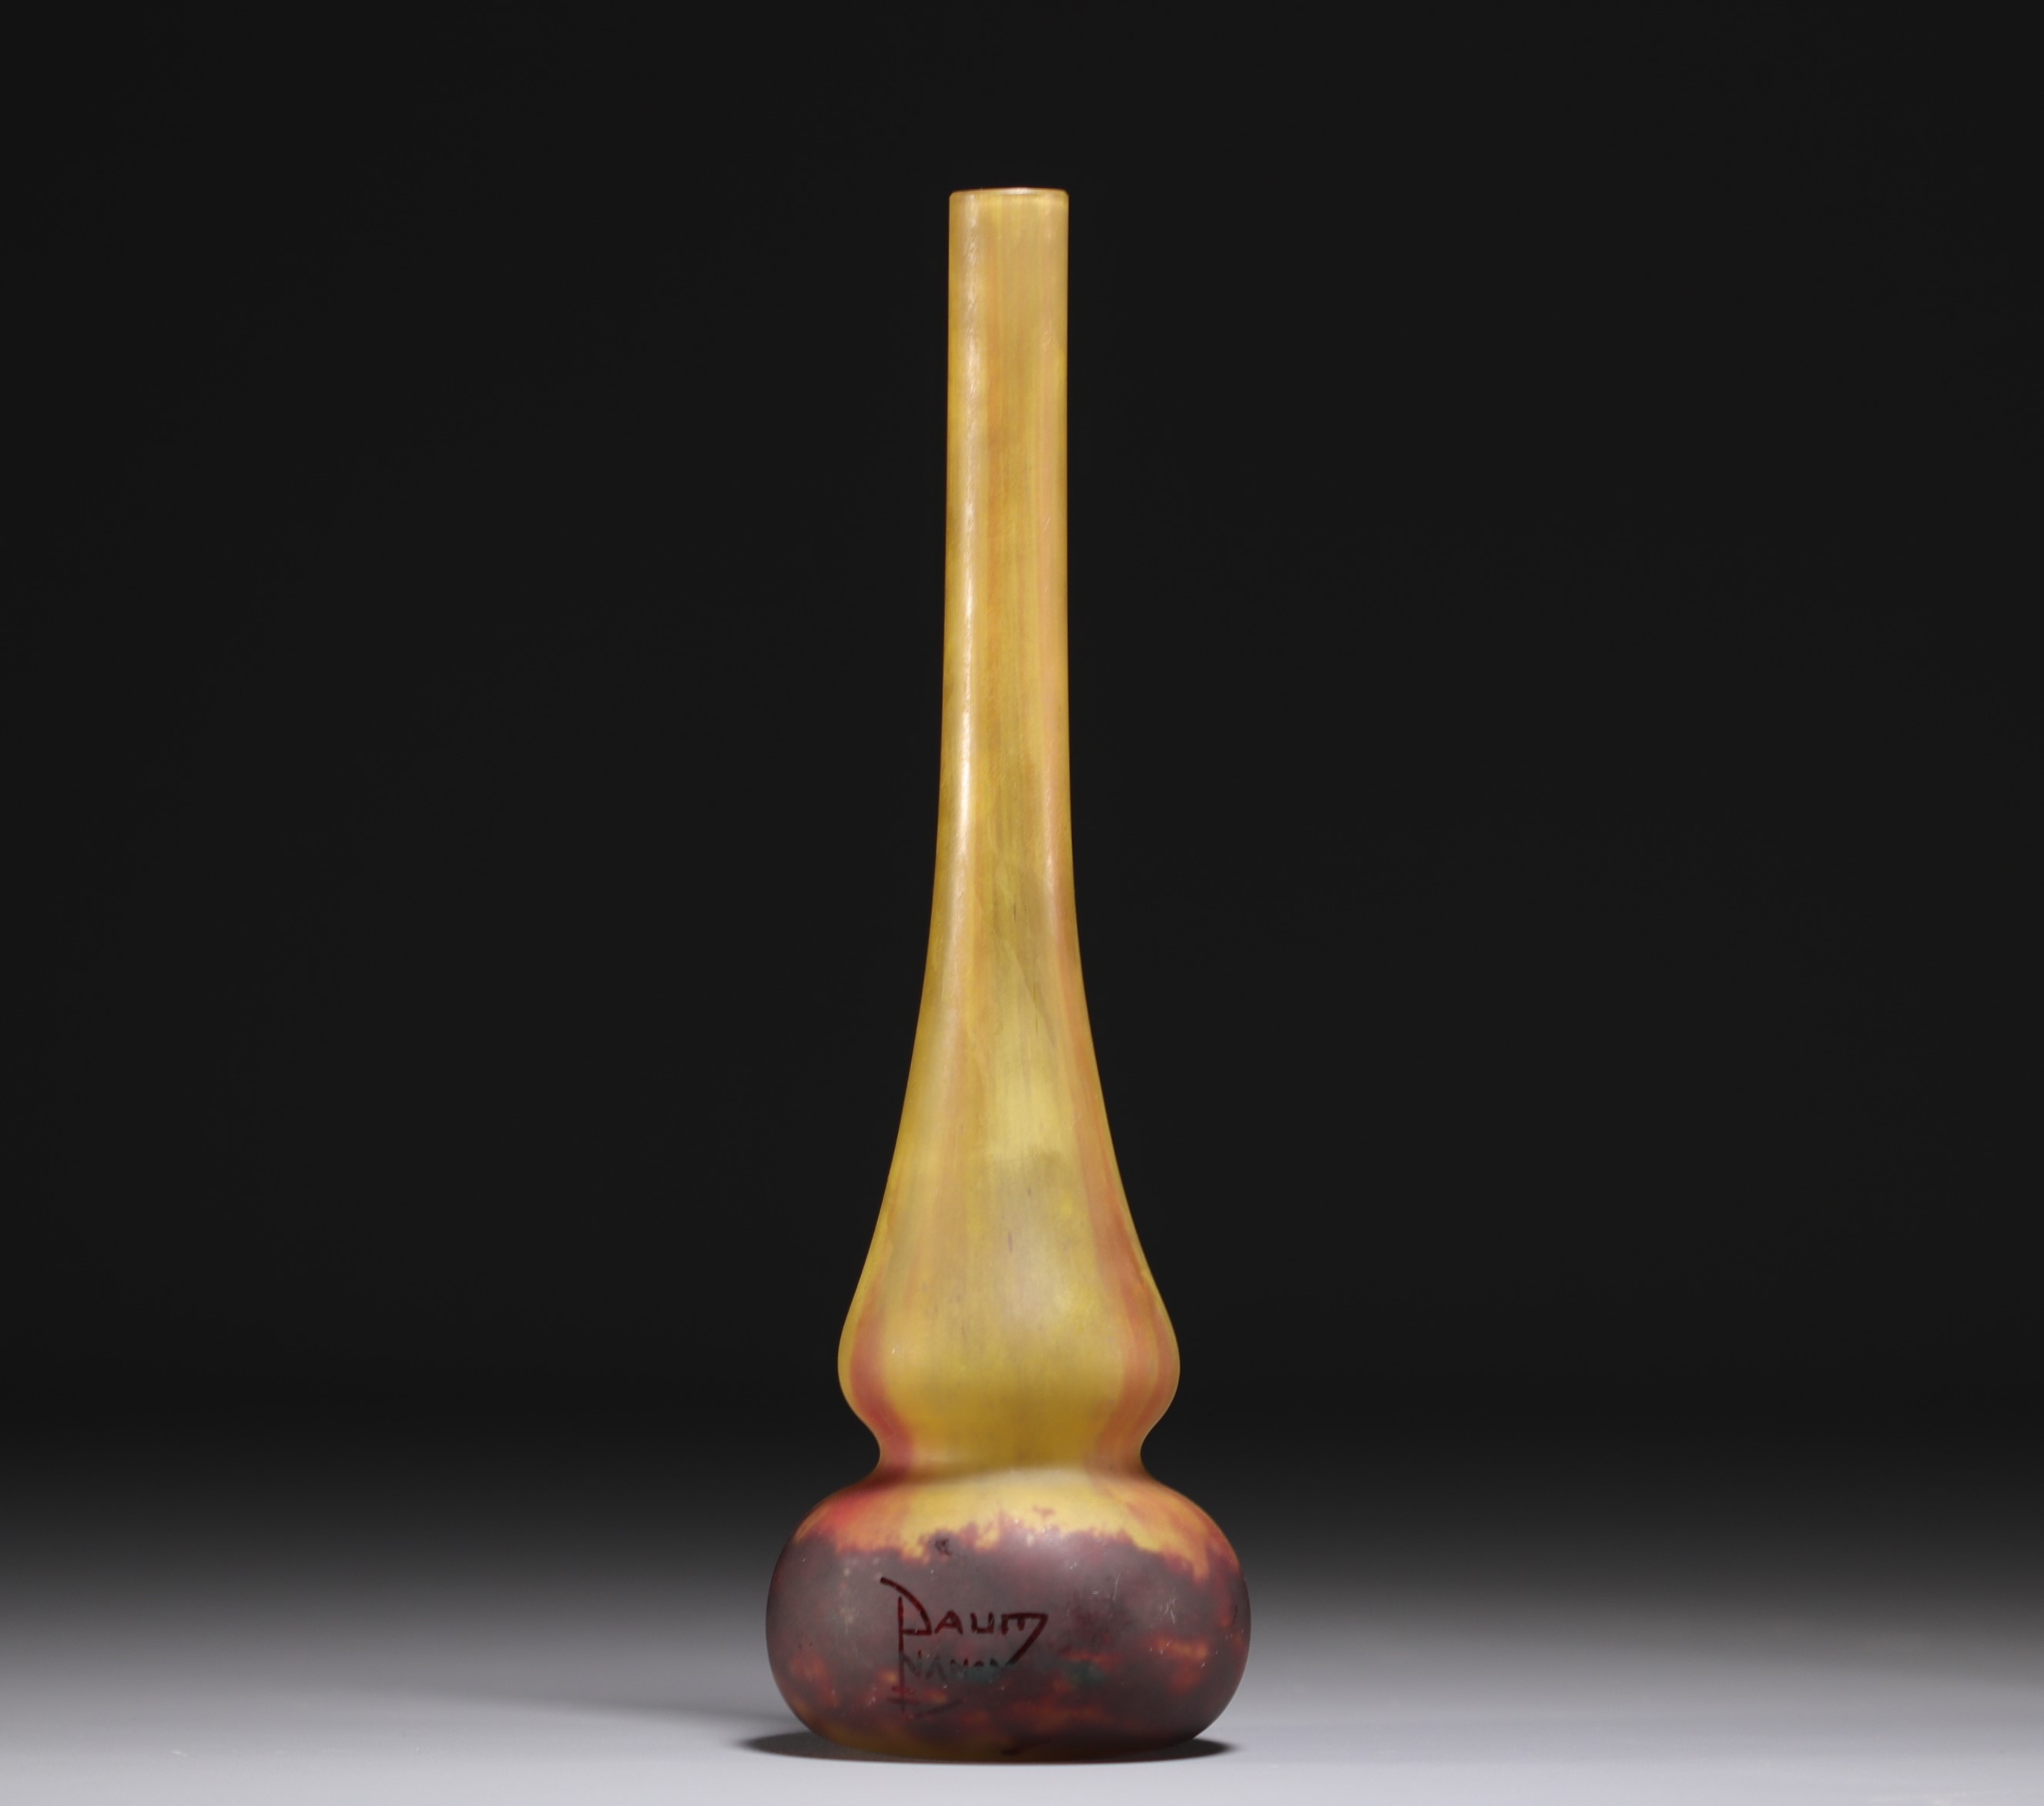 DAUM Nancy - Soliflore vase in shades of yellow and violet, signed.